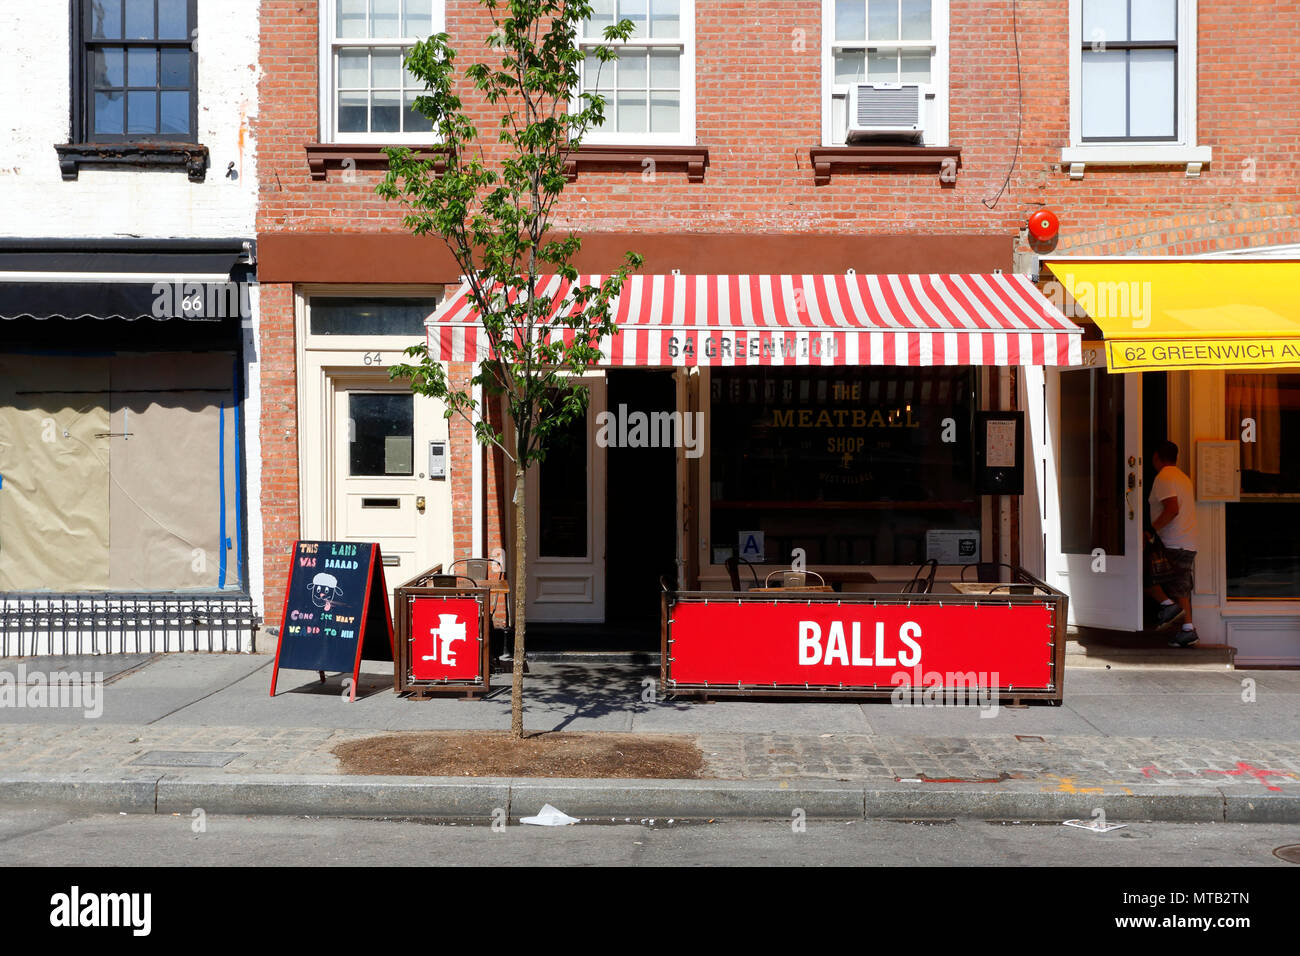 The Meatball Shop, 64 Greenwich Ave, New York, NY. exterior storefront of an italian restaurant in the Greenwich Village neighborhood of Manhattan. Stock Photo